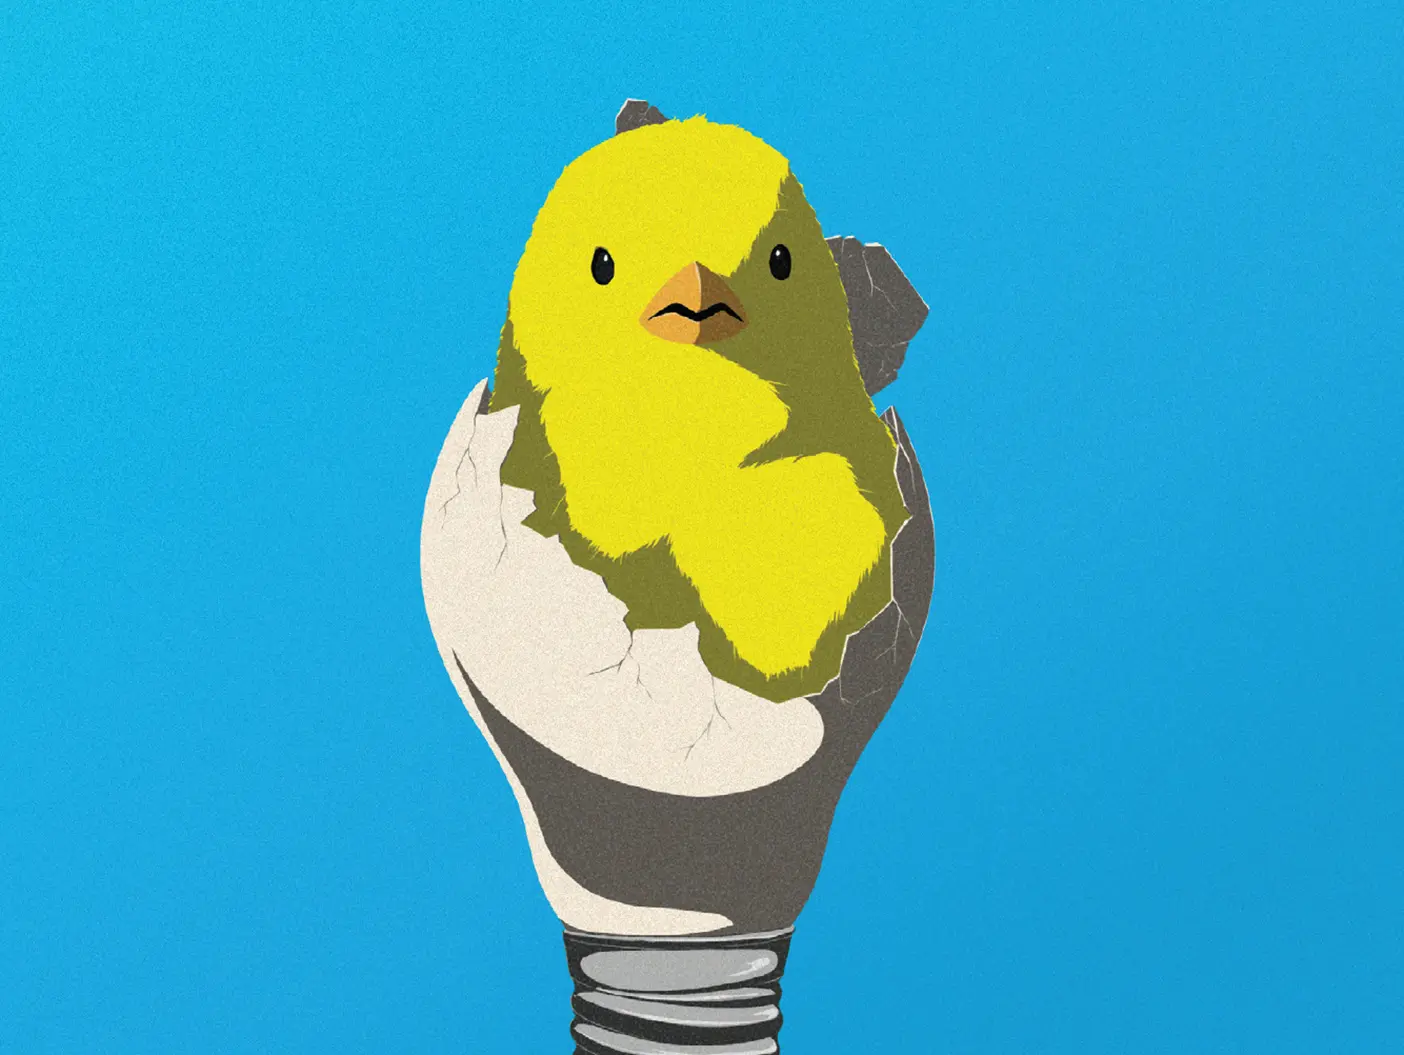 A baby chick hatches out of a lightbulb.